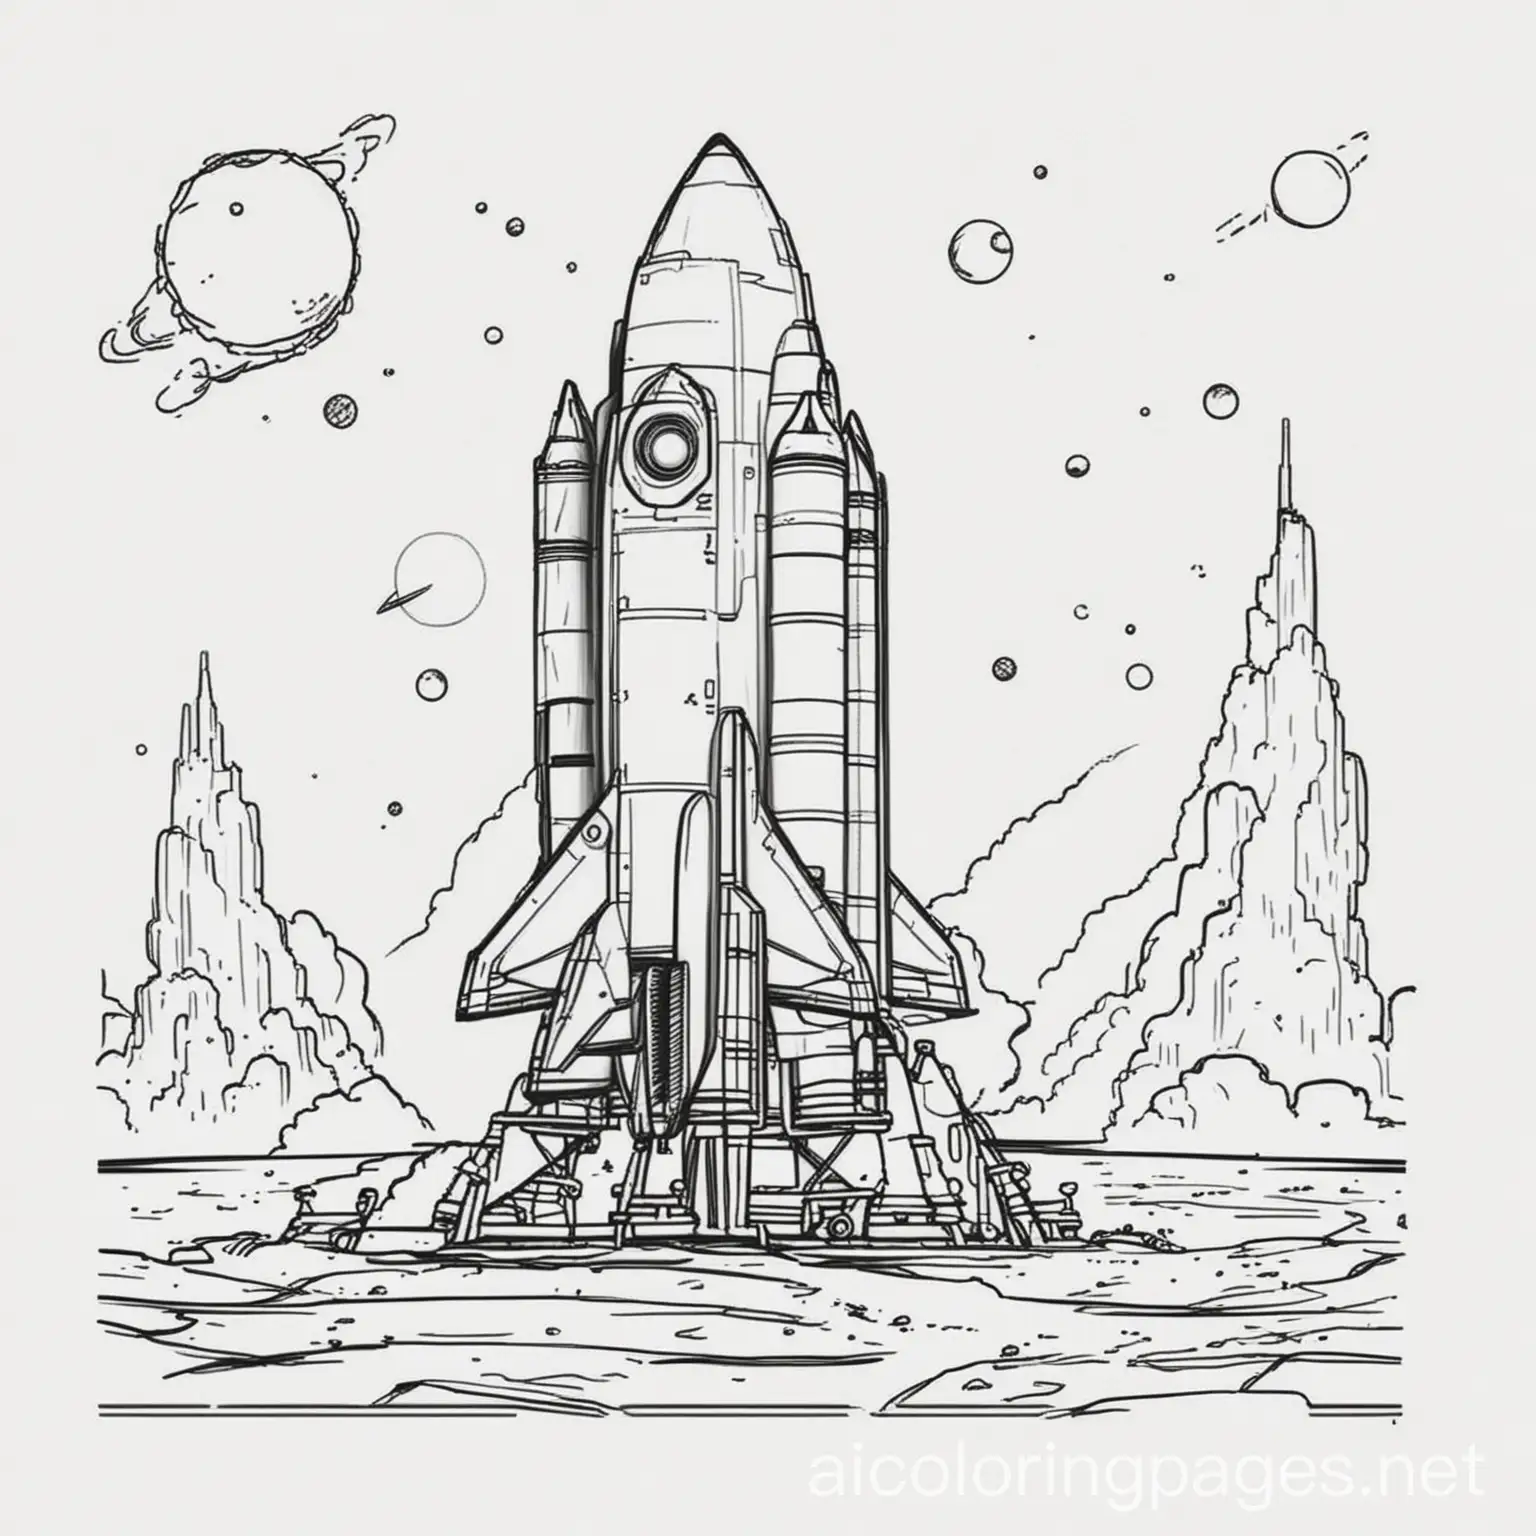 Rocket-Launch-Pad-Coloring-Page-Ready-for-LiftOff